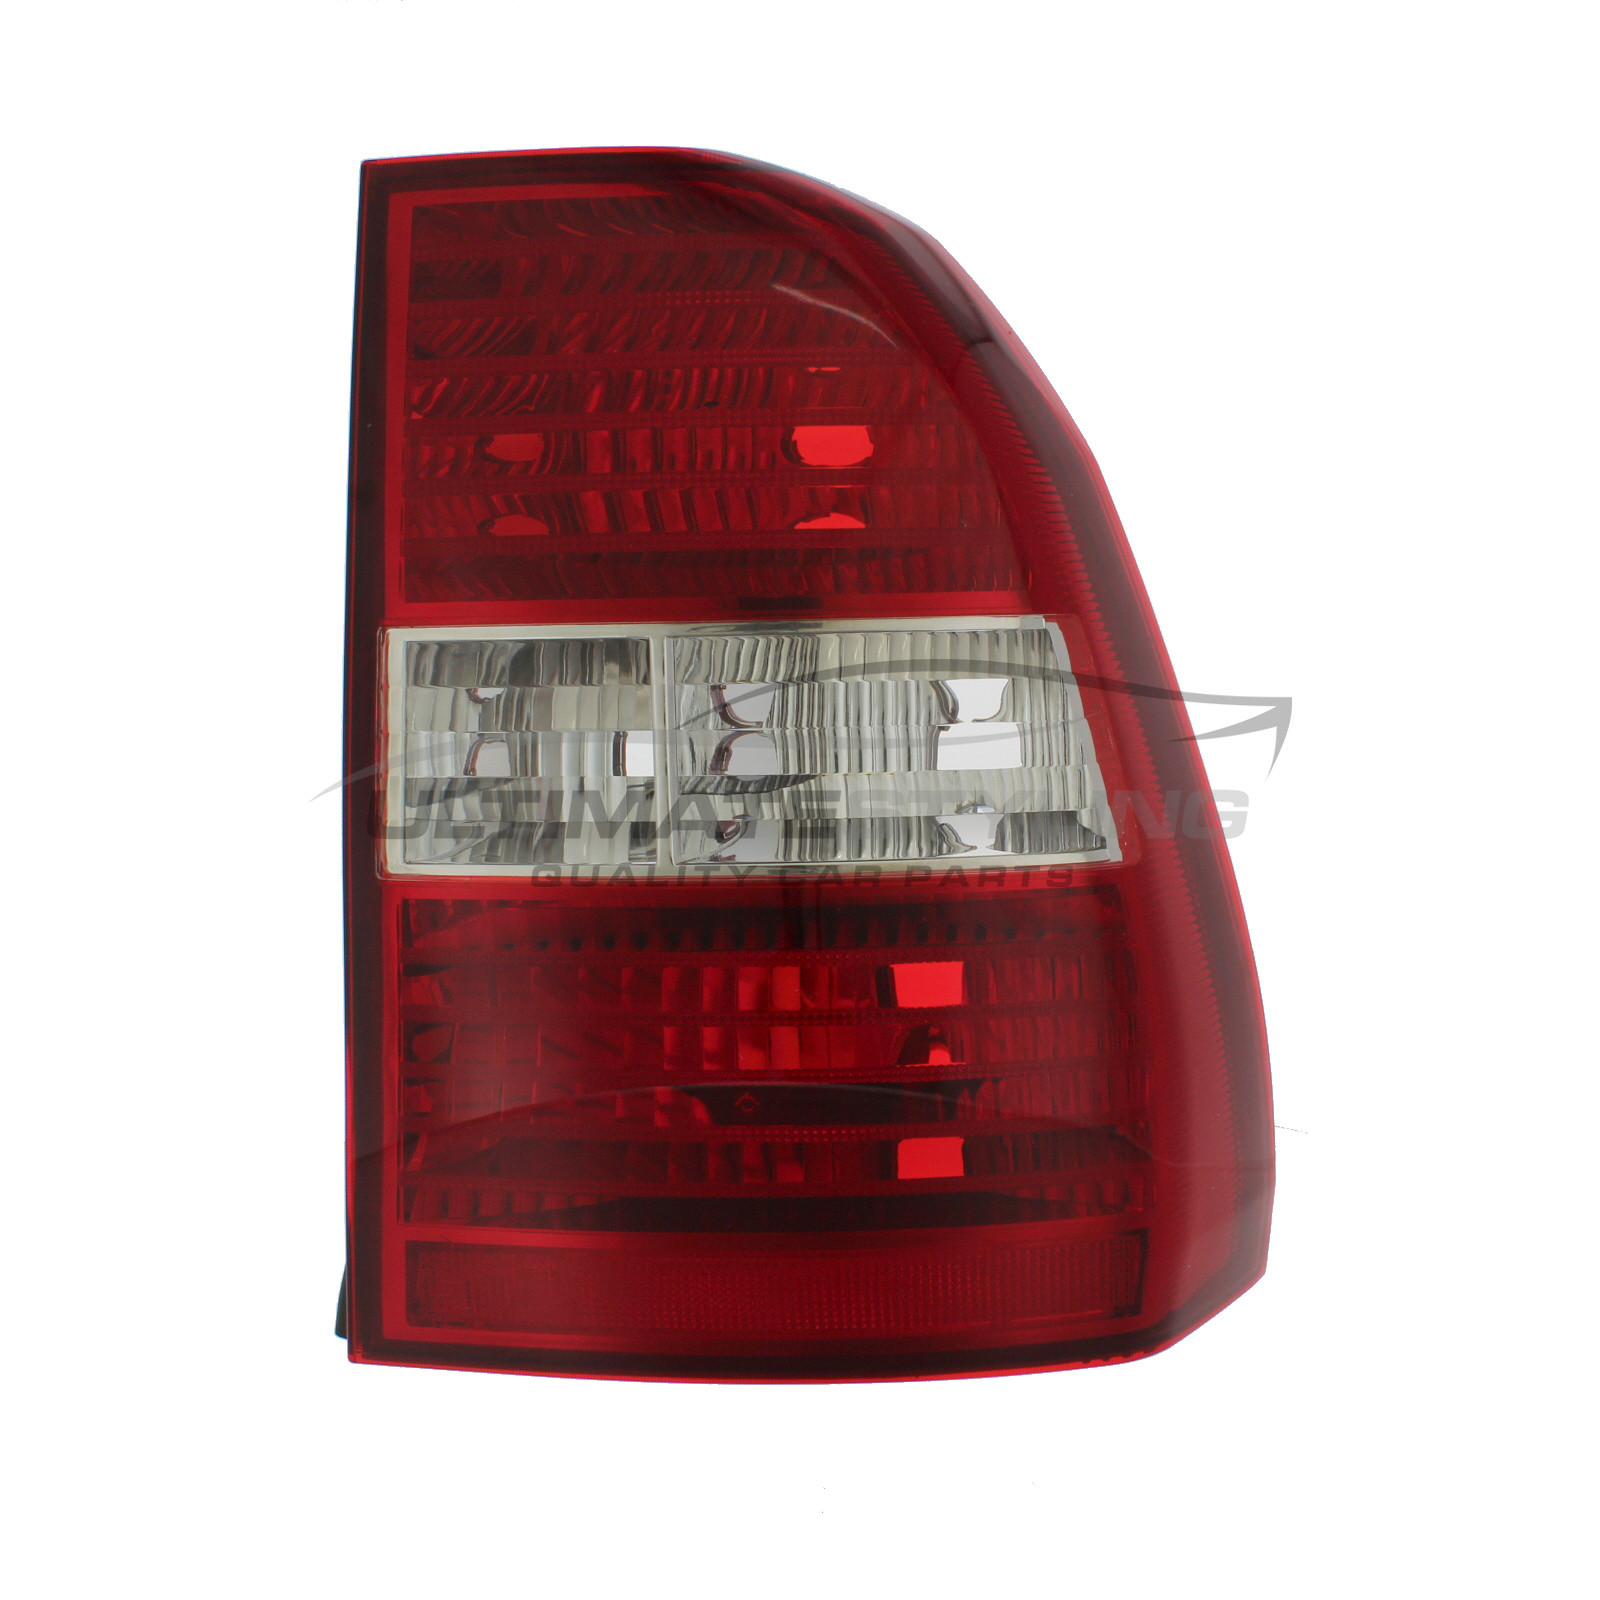 Kia Sportage 2005-2008 Non-LED with Clear Indicator Rear Light / Tail Light Excluding Bulb Holder Drivers Side (RH)